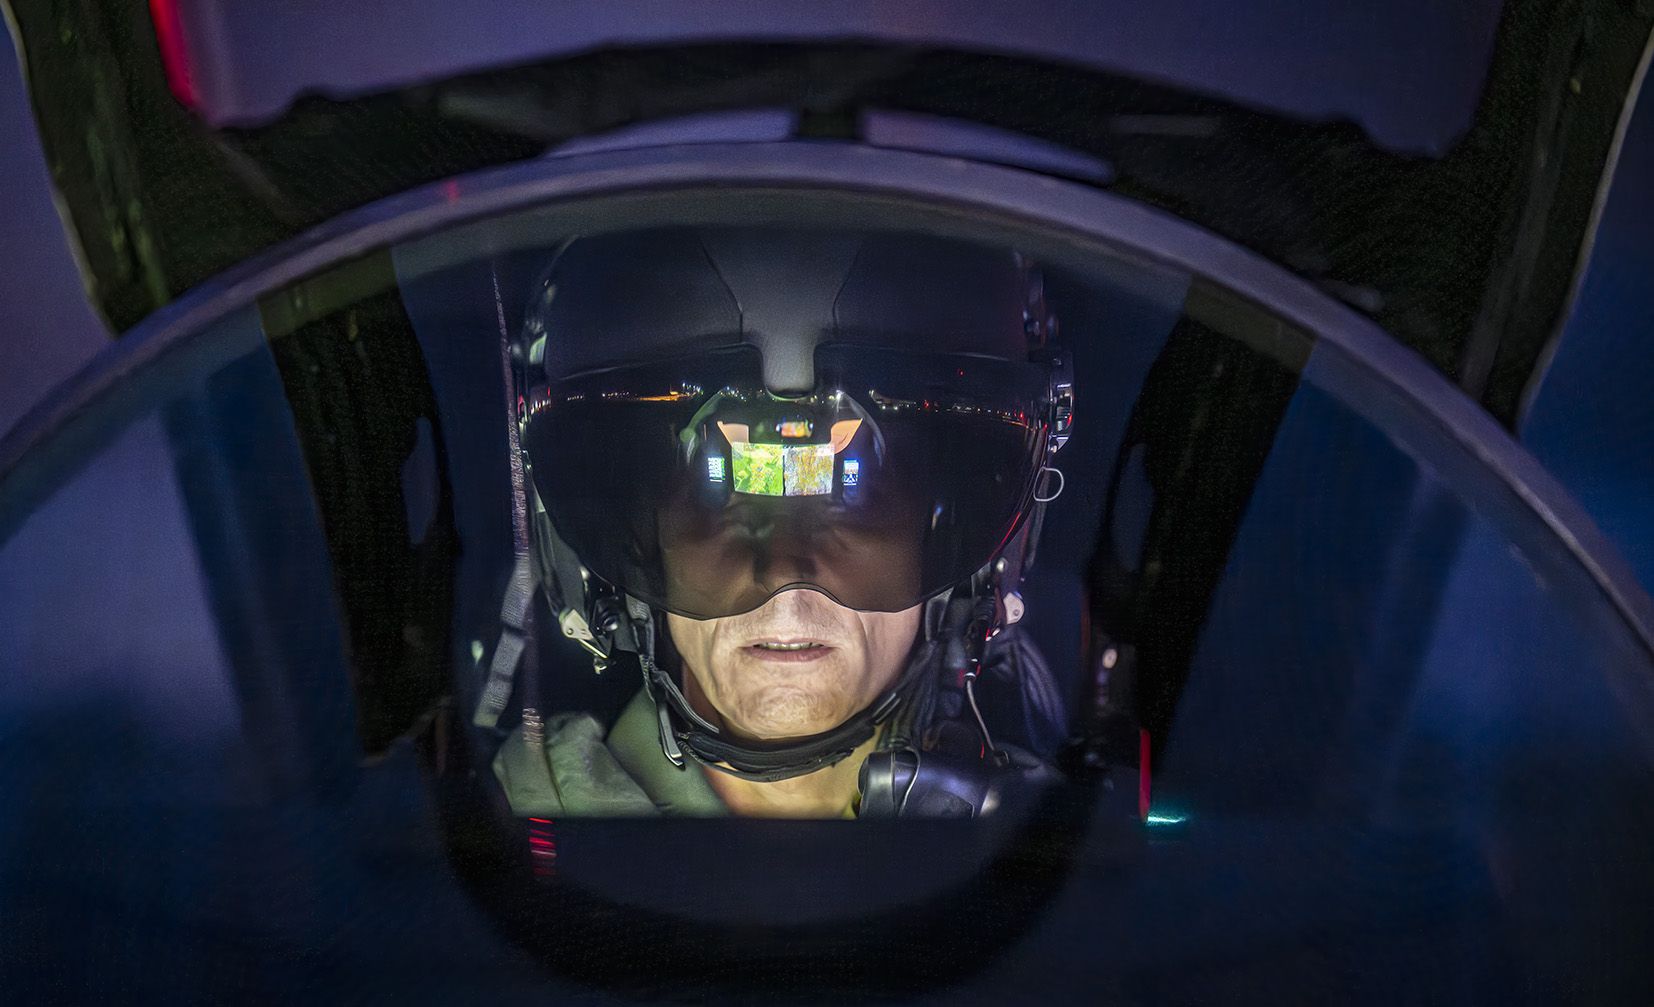 PTC works with BAE Systems to bring next generation fighter pilot helmet to market